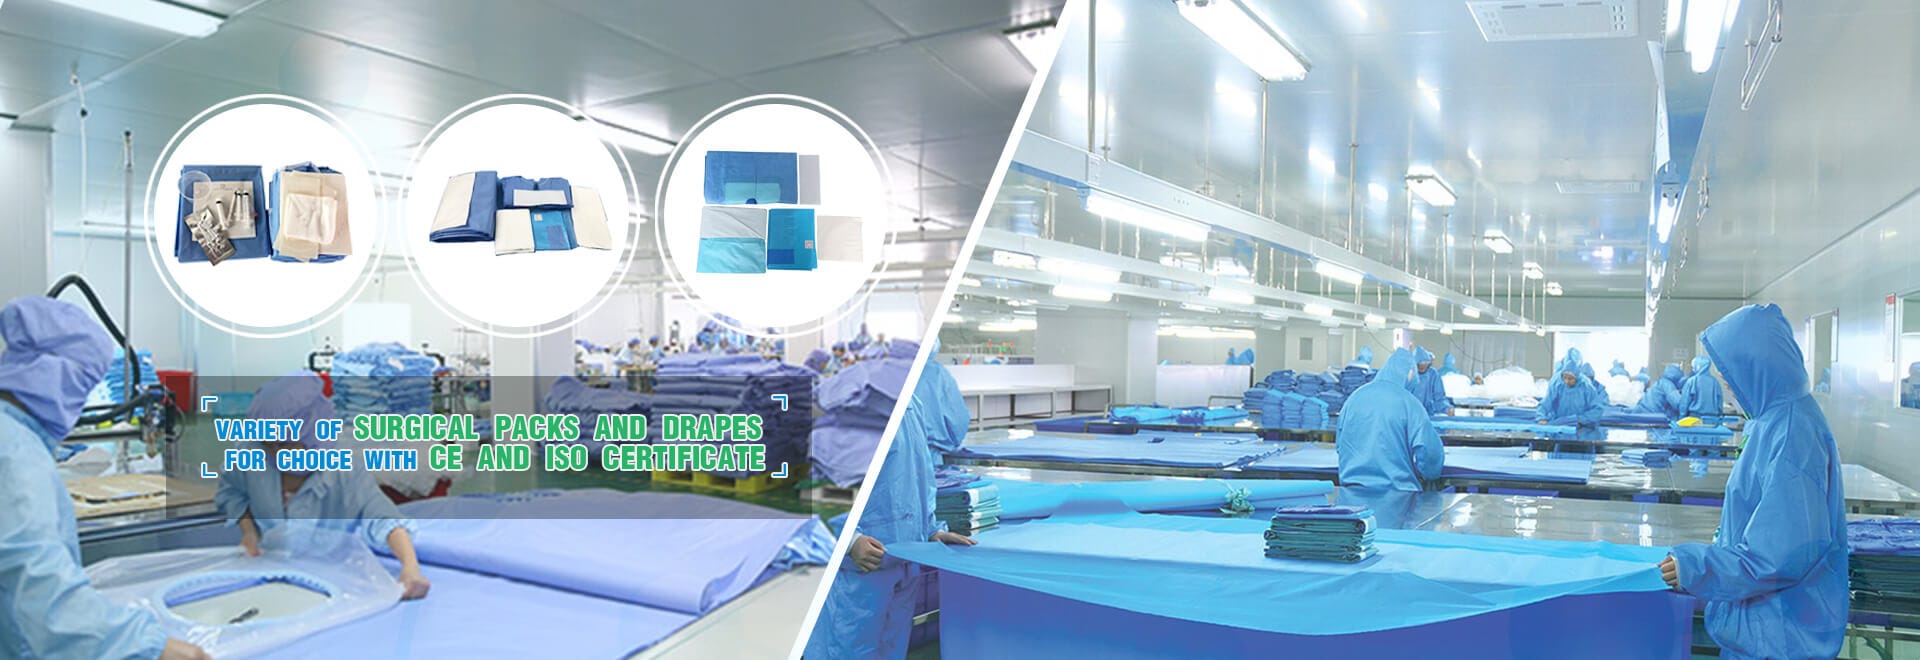 Lantian Medical is a professional manufacturer of surgical drapes and gowns, surgical packs, hospital gown and hospital bed sheet, which have received high prai